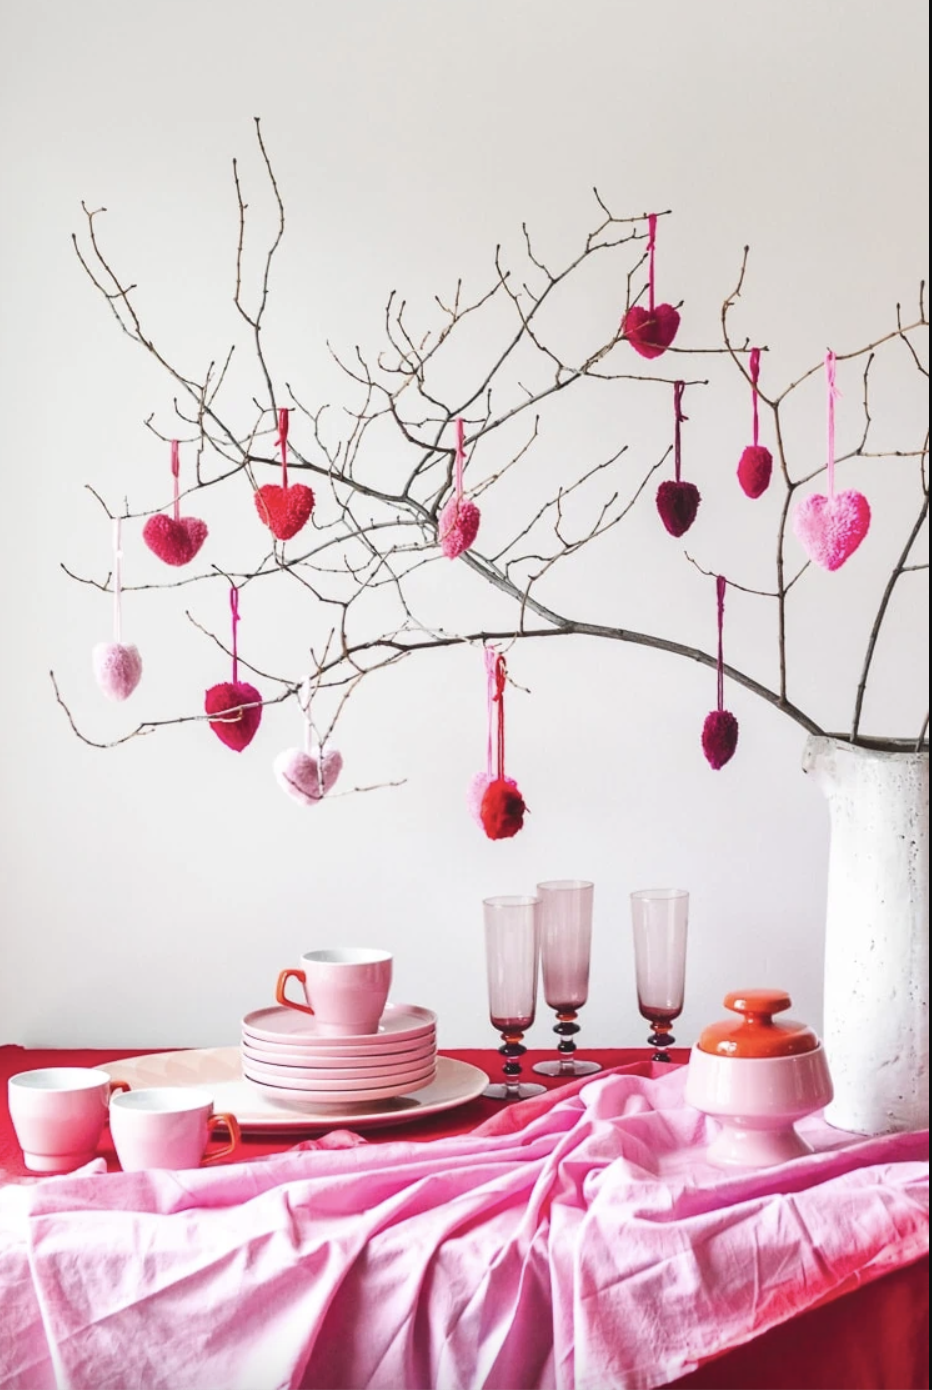 DIY Valentine's Day Table Decorations, Settings, and Centerpieces